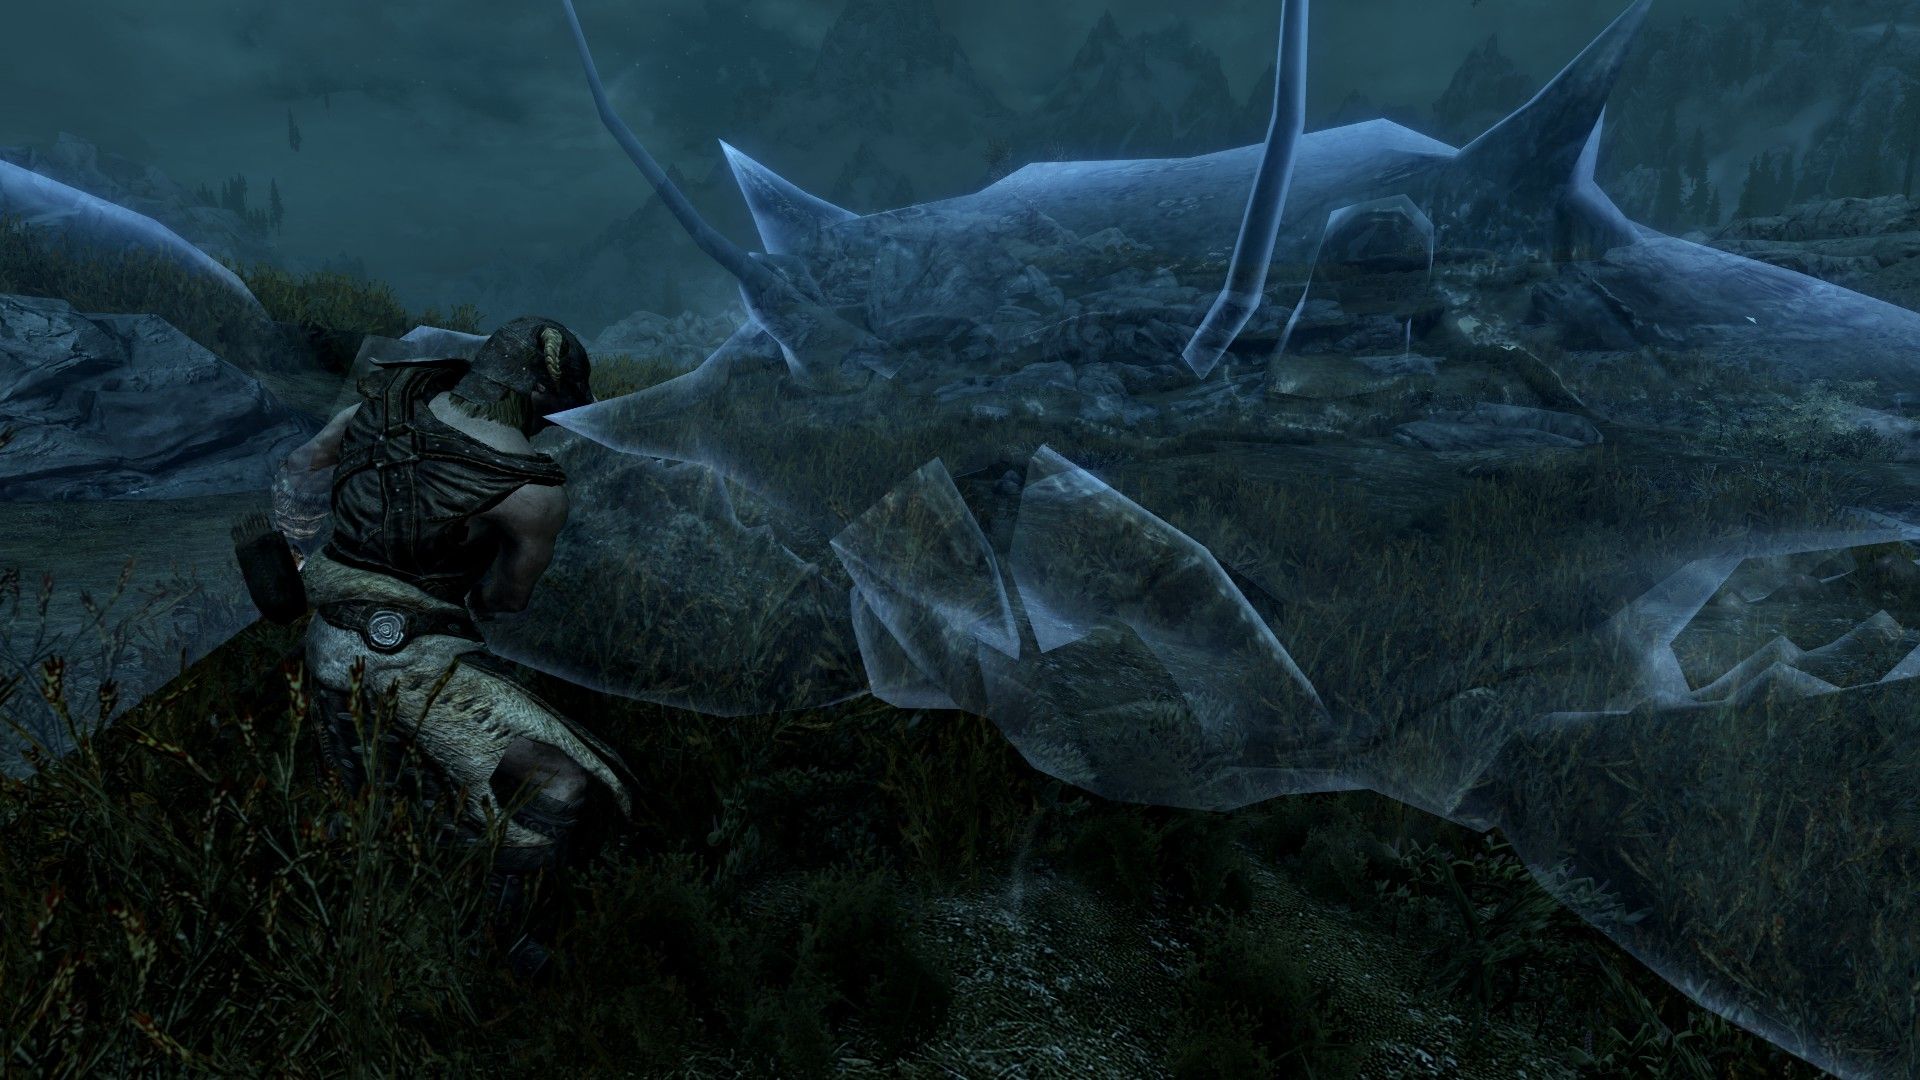 An adventurer fights a huge ghostly crab at night and is visibly dwarfed by it.